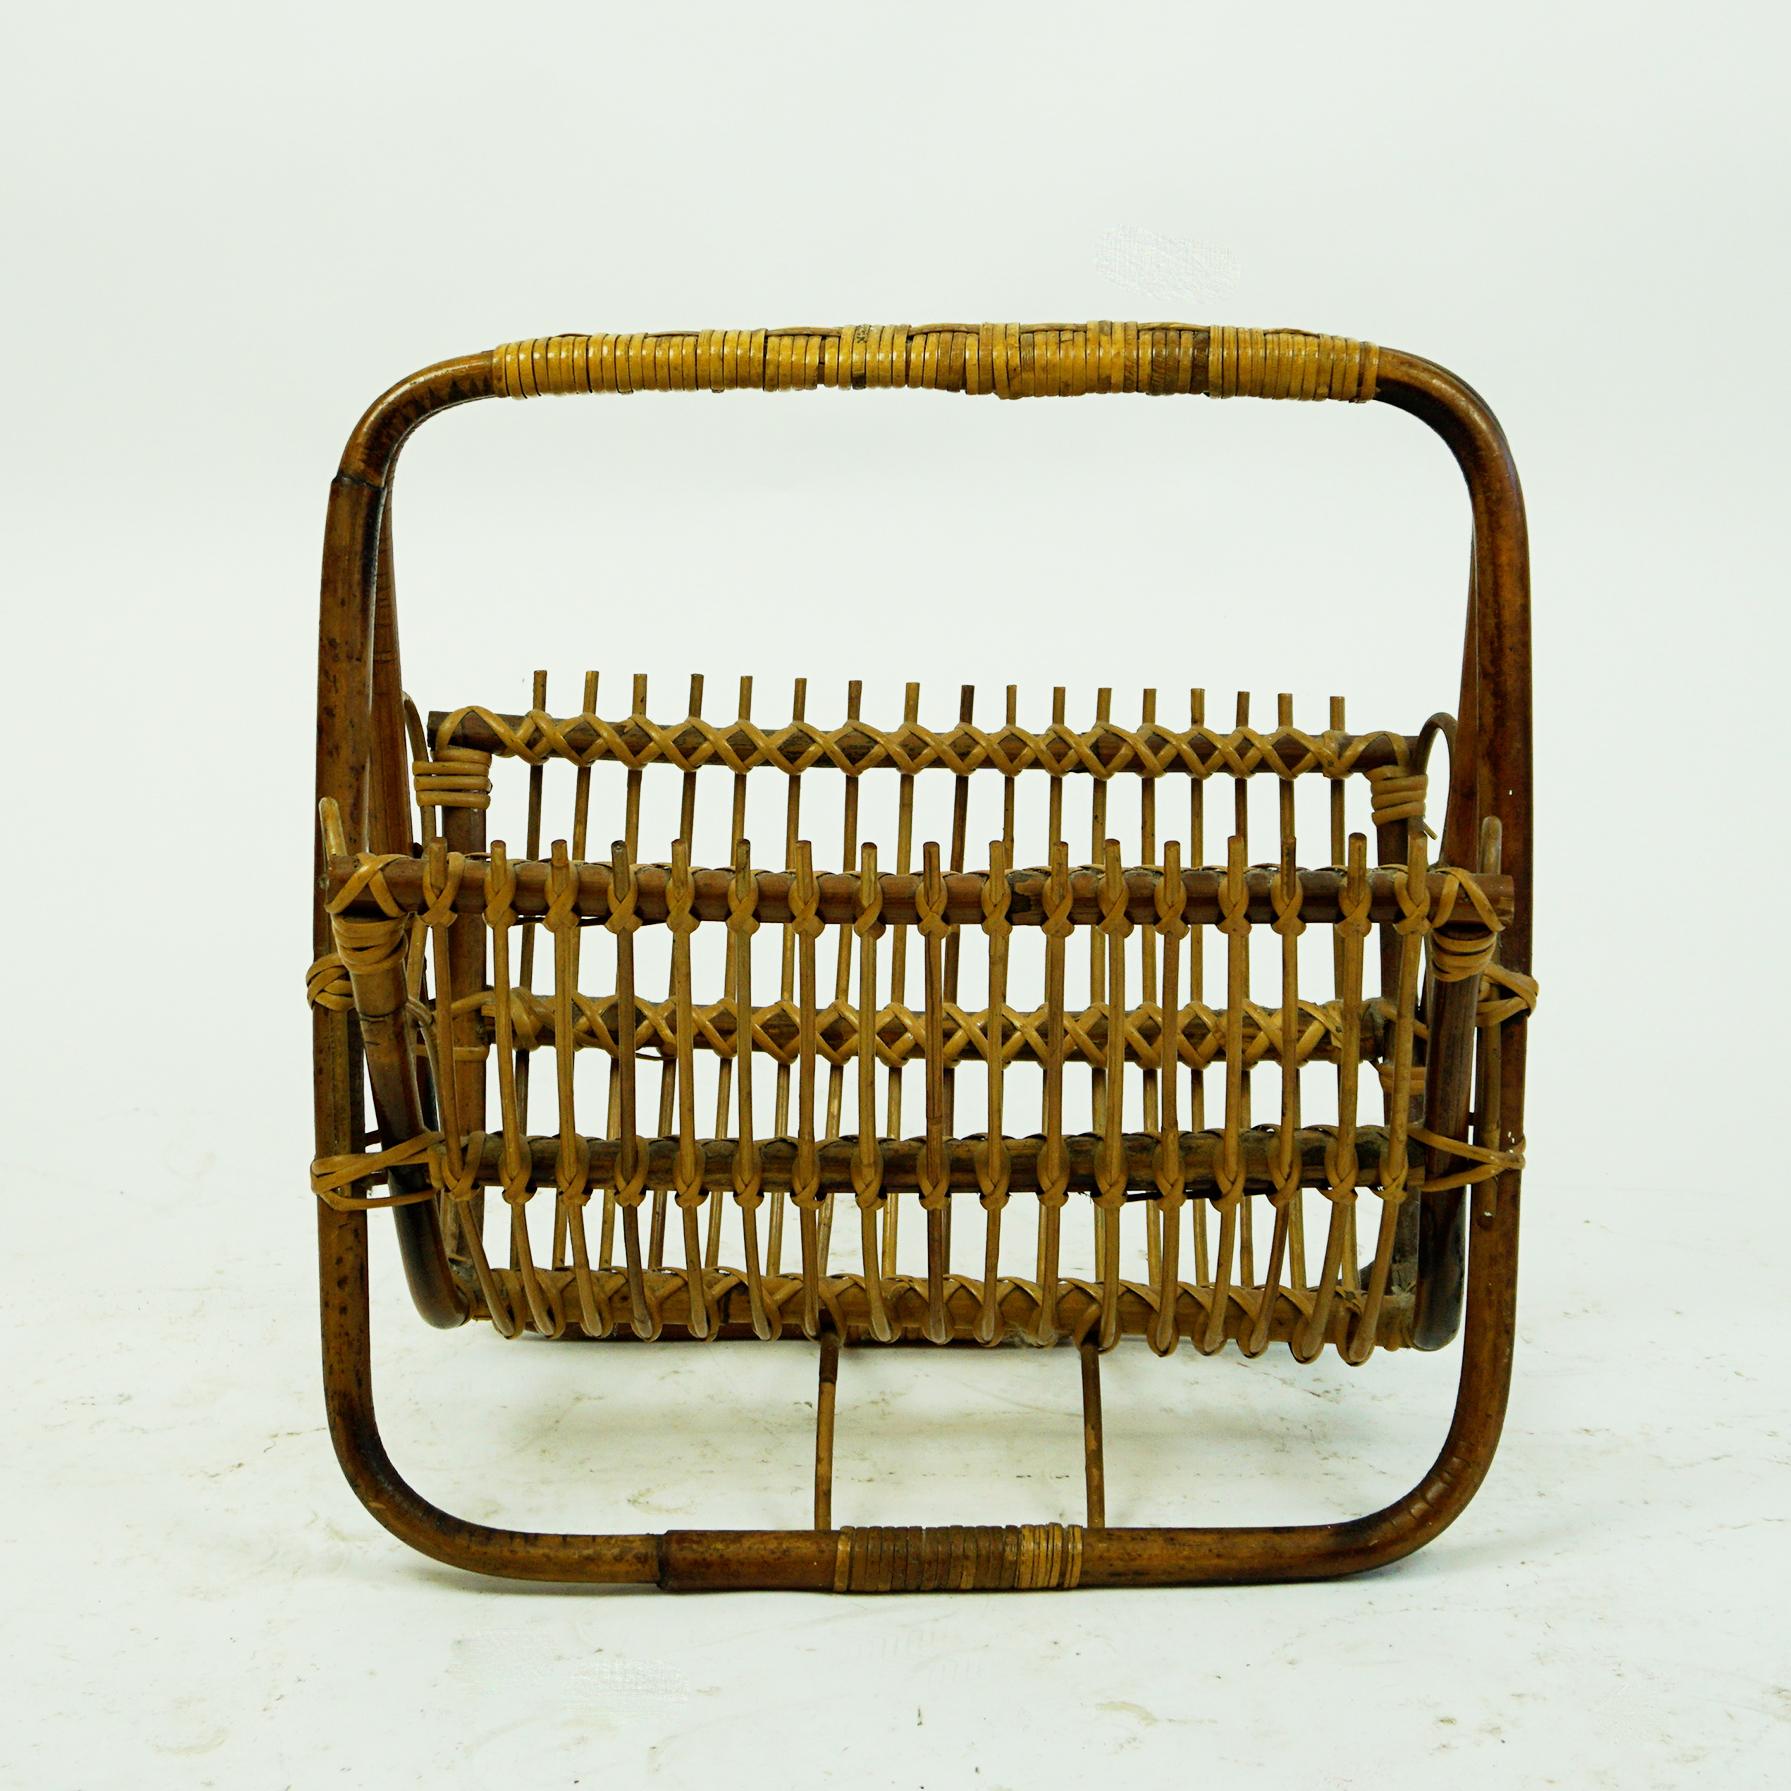 This charming Italian midcentury bamboo and wicker magazine holder or rack has been designed and manufactured in Italy 1960s. 
It´s style and manner of wickerwork reminds to furniture pieces designed by Franco Albini for Bonacina and will be a